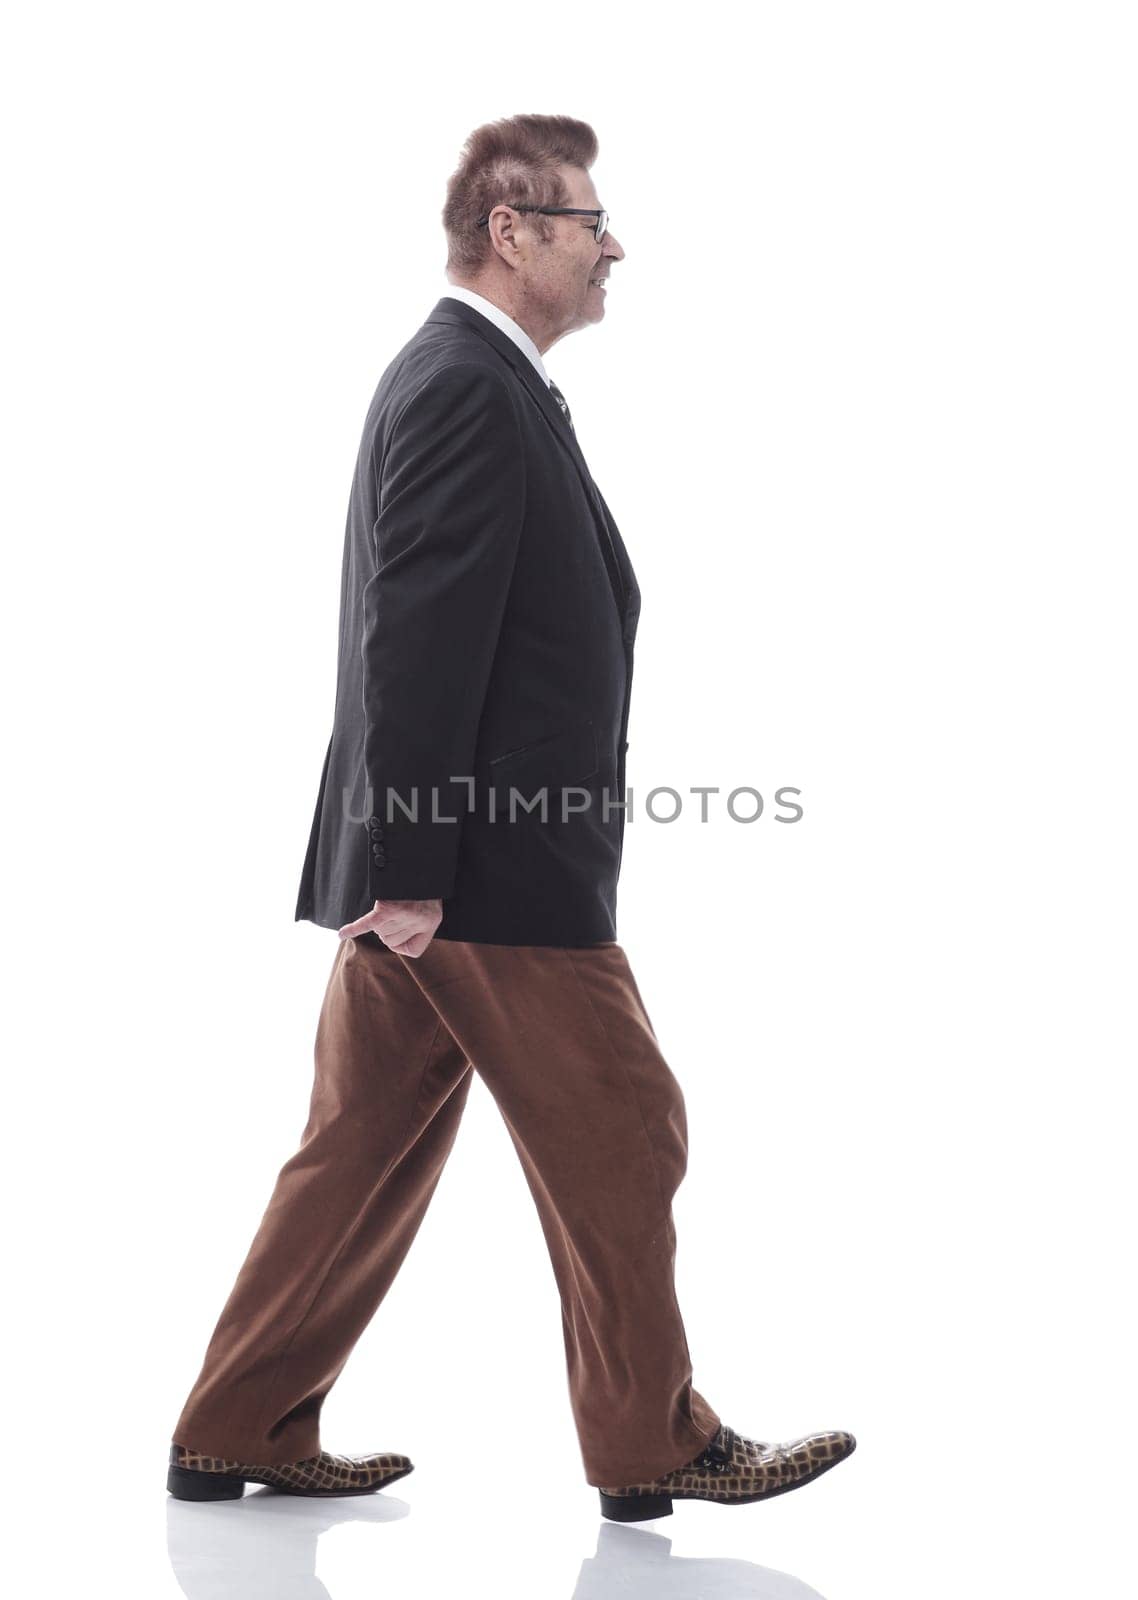 in full growth. smiling business man walking towards you . isolated on a white background